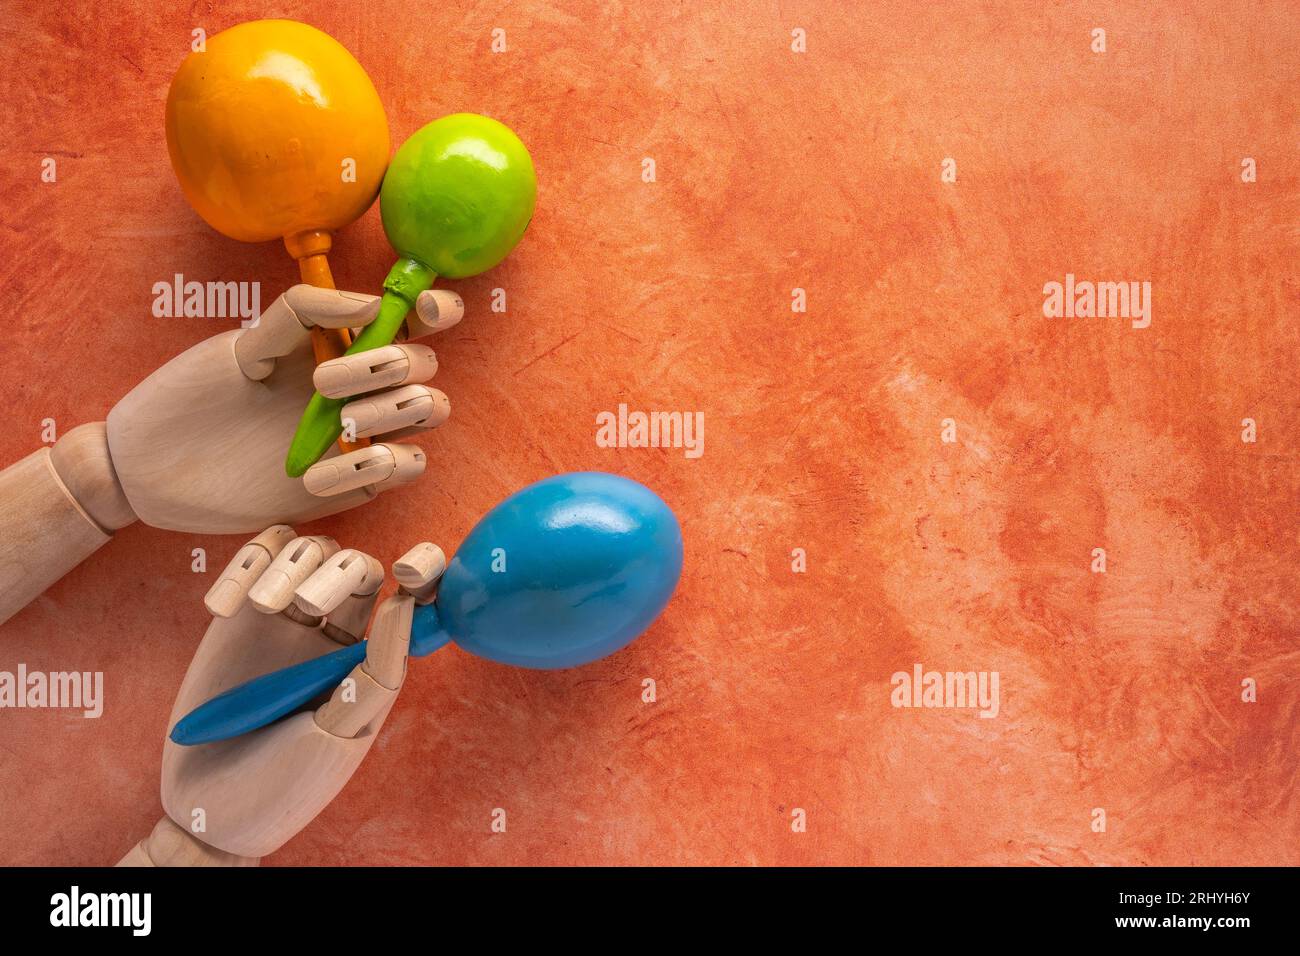 bright festive musical theme with yellow, green and blue maracas in wooden hands on a mottled orange background Stock Photo